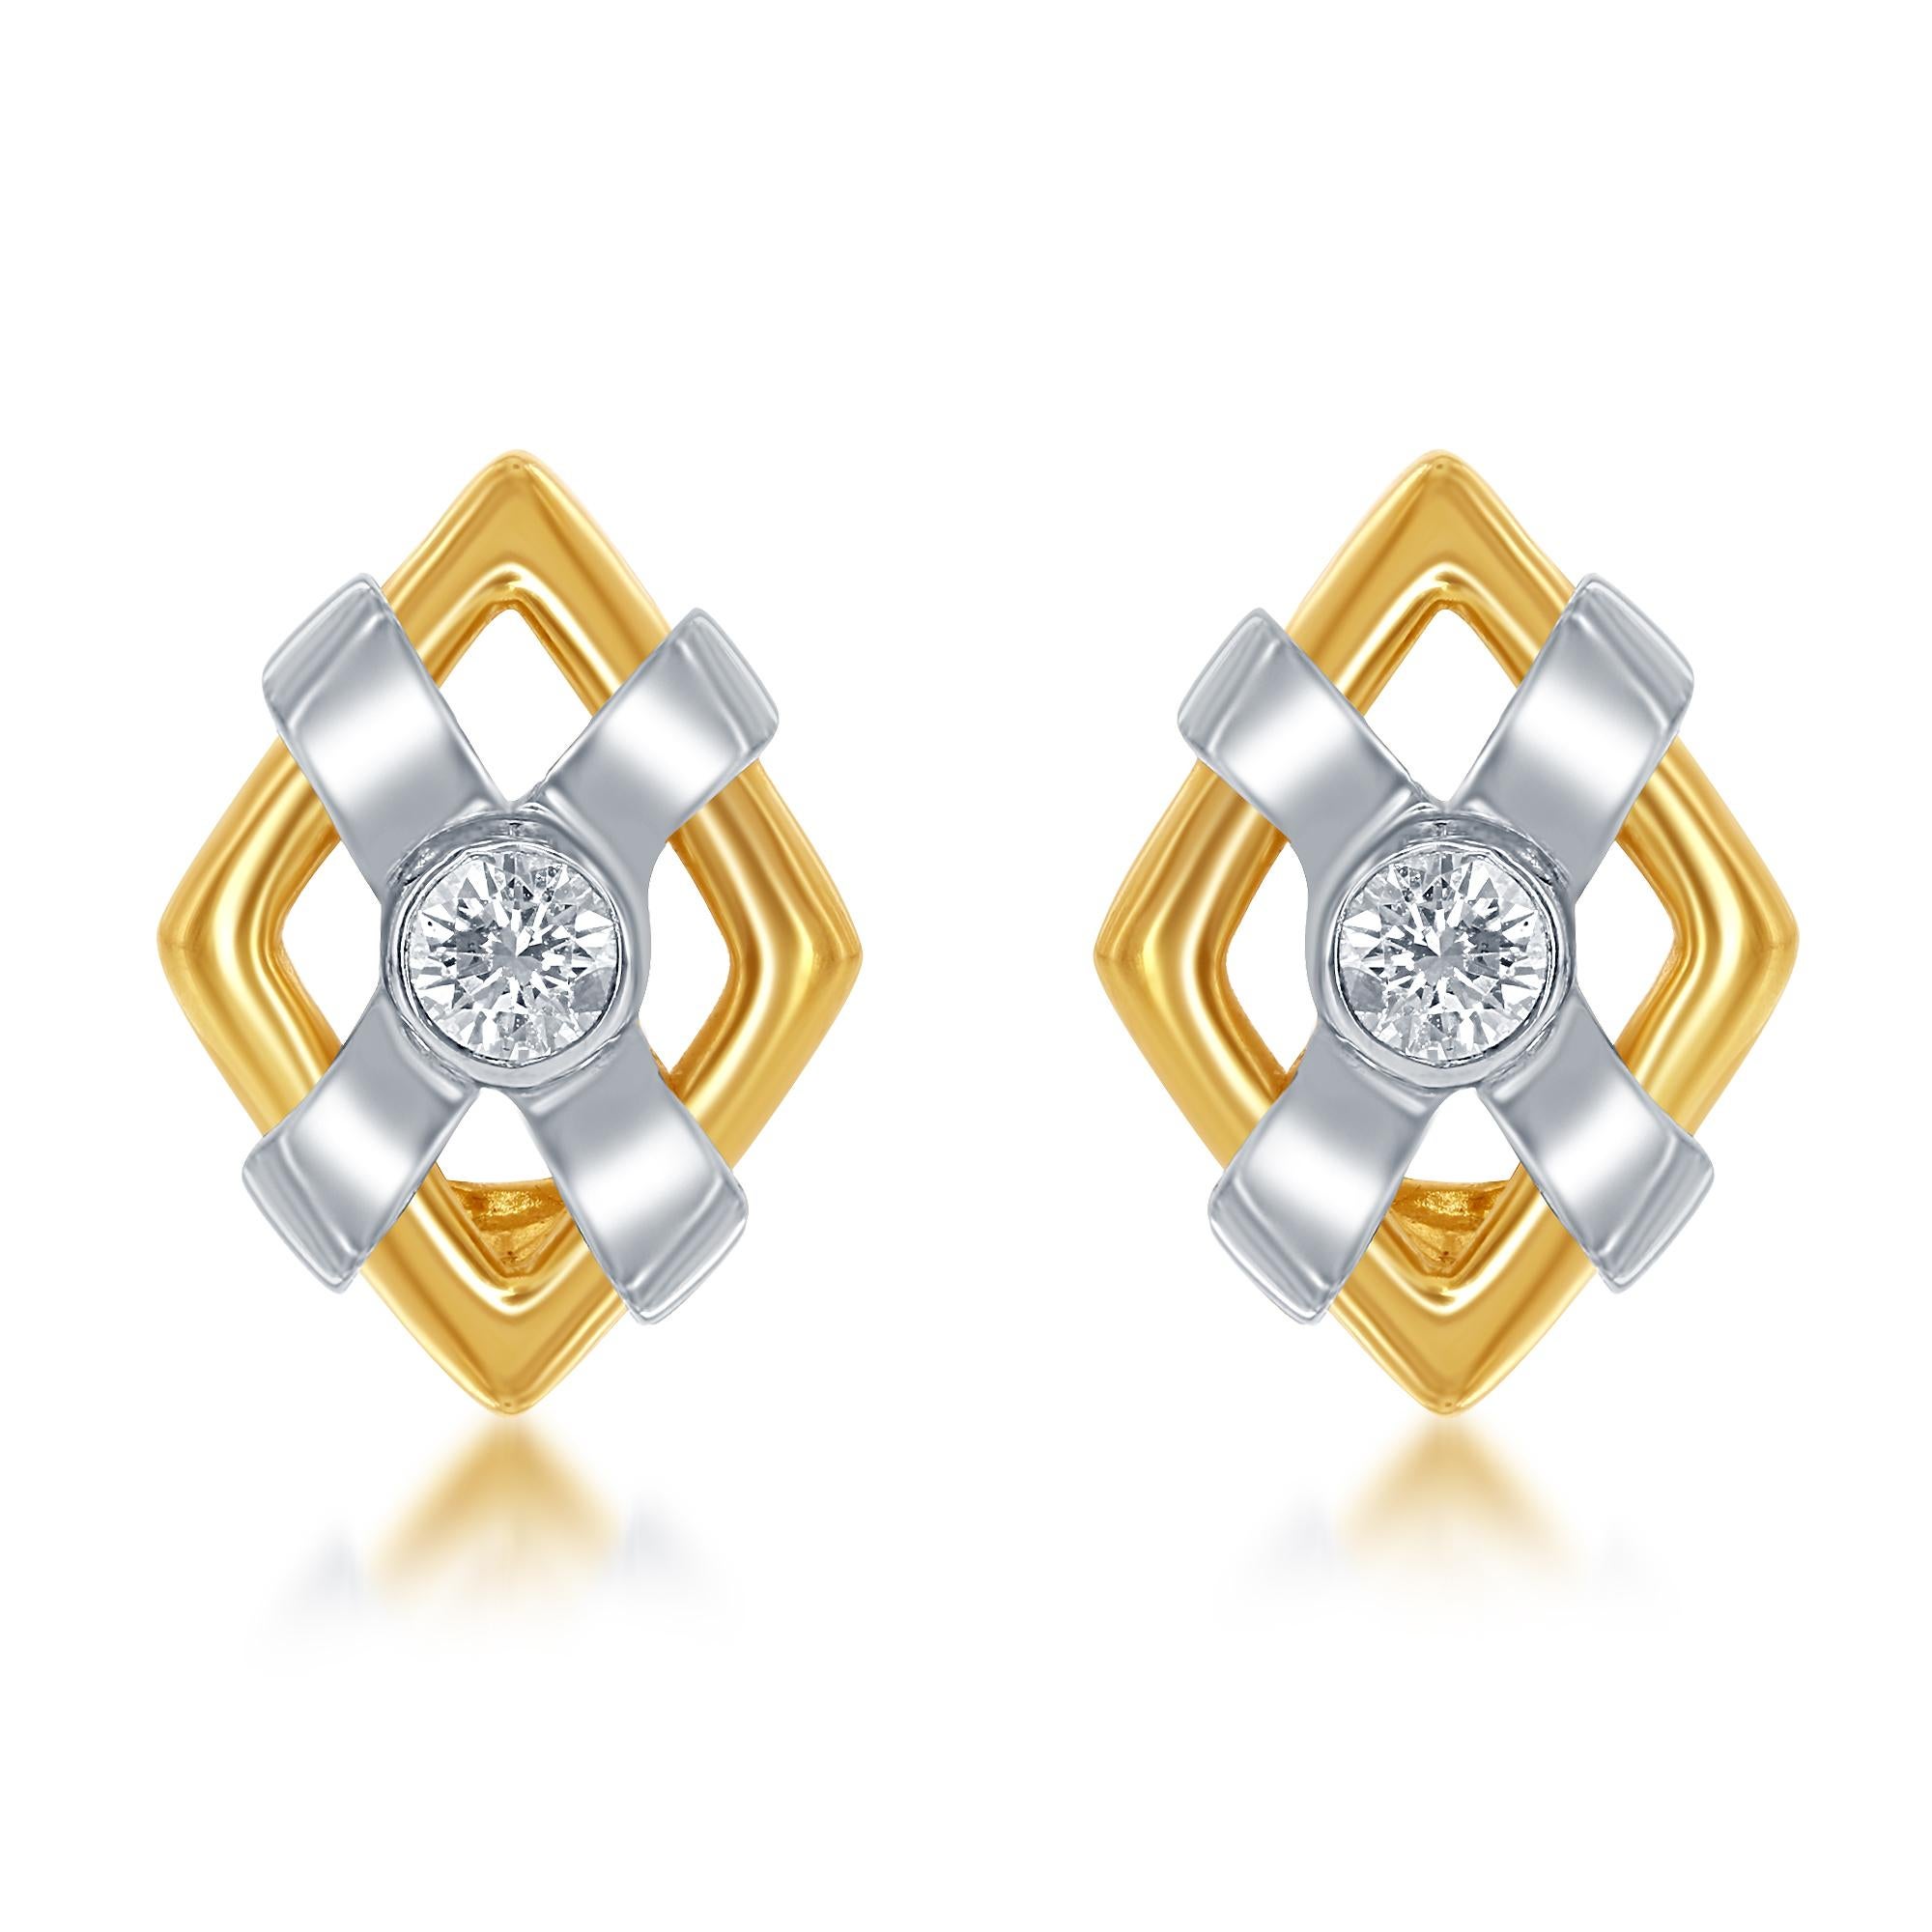 14 kt white and yellow gold diamond earrings containing 0.50 cts tw of diamonds.
Diana M. is a leading supplier of top-quality fine jewelry for over 35 years.
Diana M is one-stop shop for all your jewelry shopping, carrying line of diamond rings,